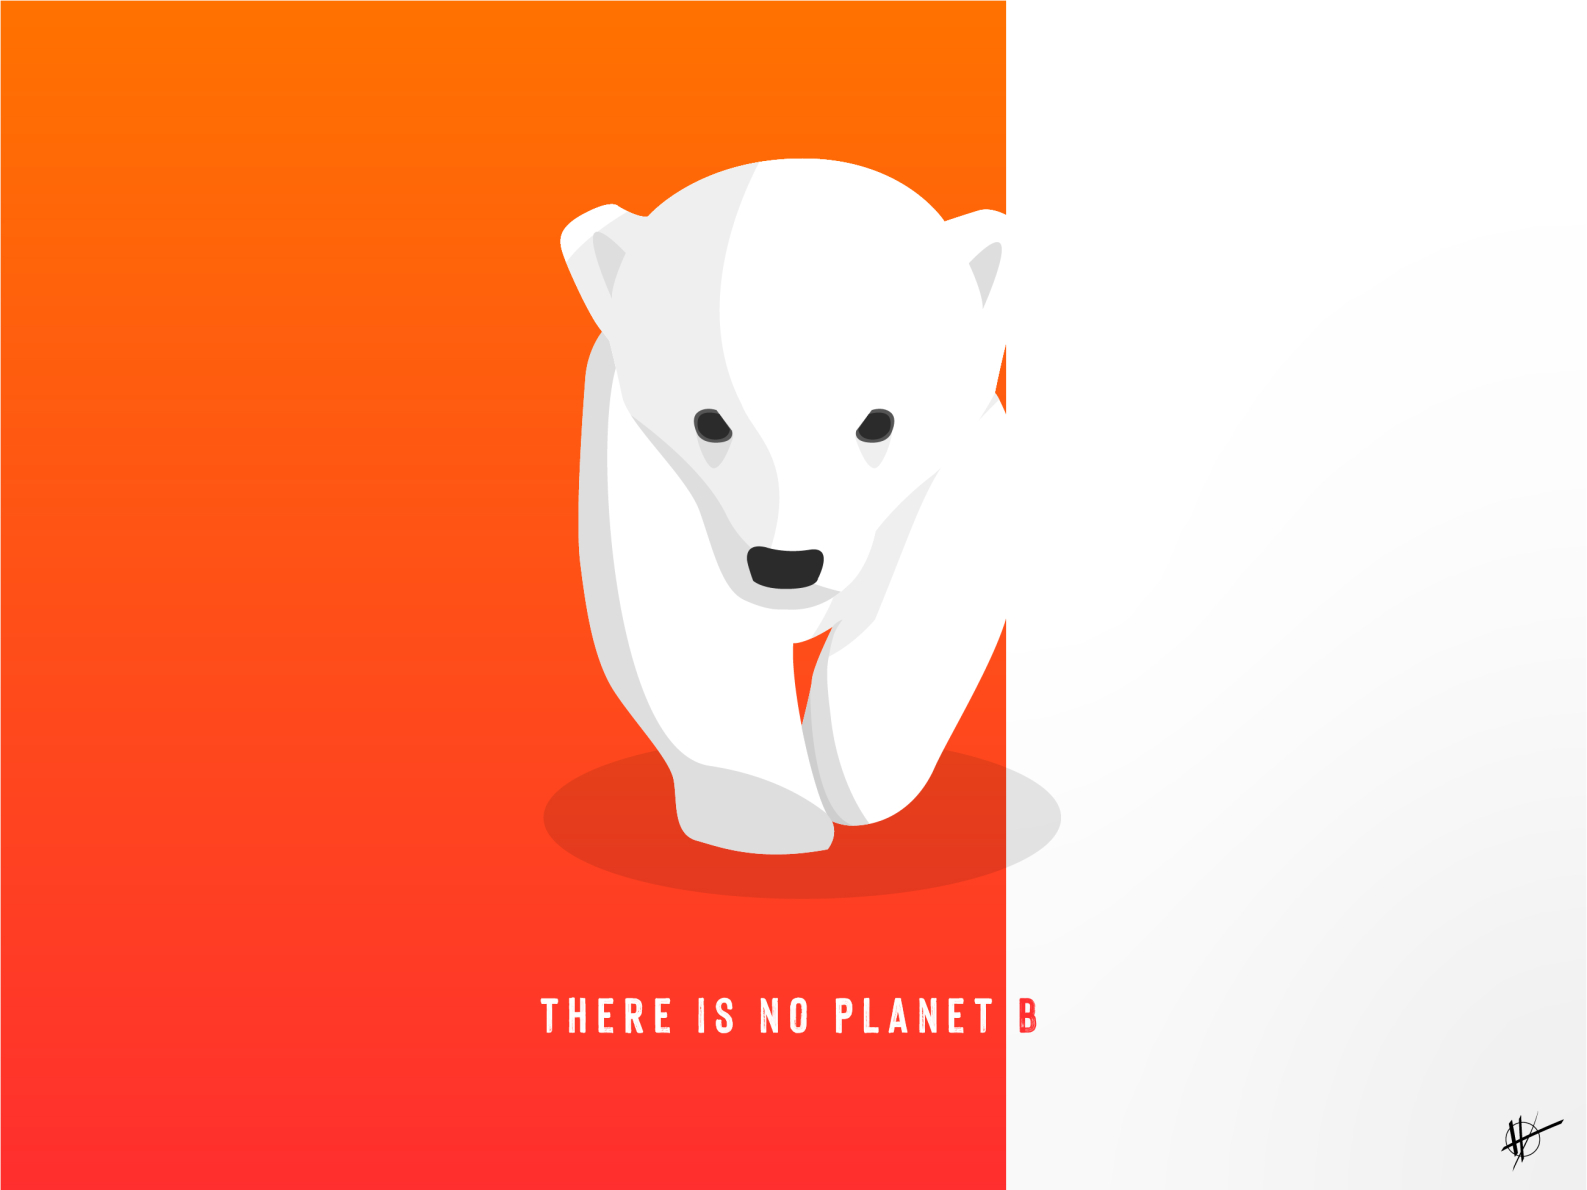 There is no planet B by Hugo Vanmalle on Dribbble